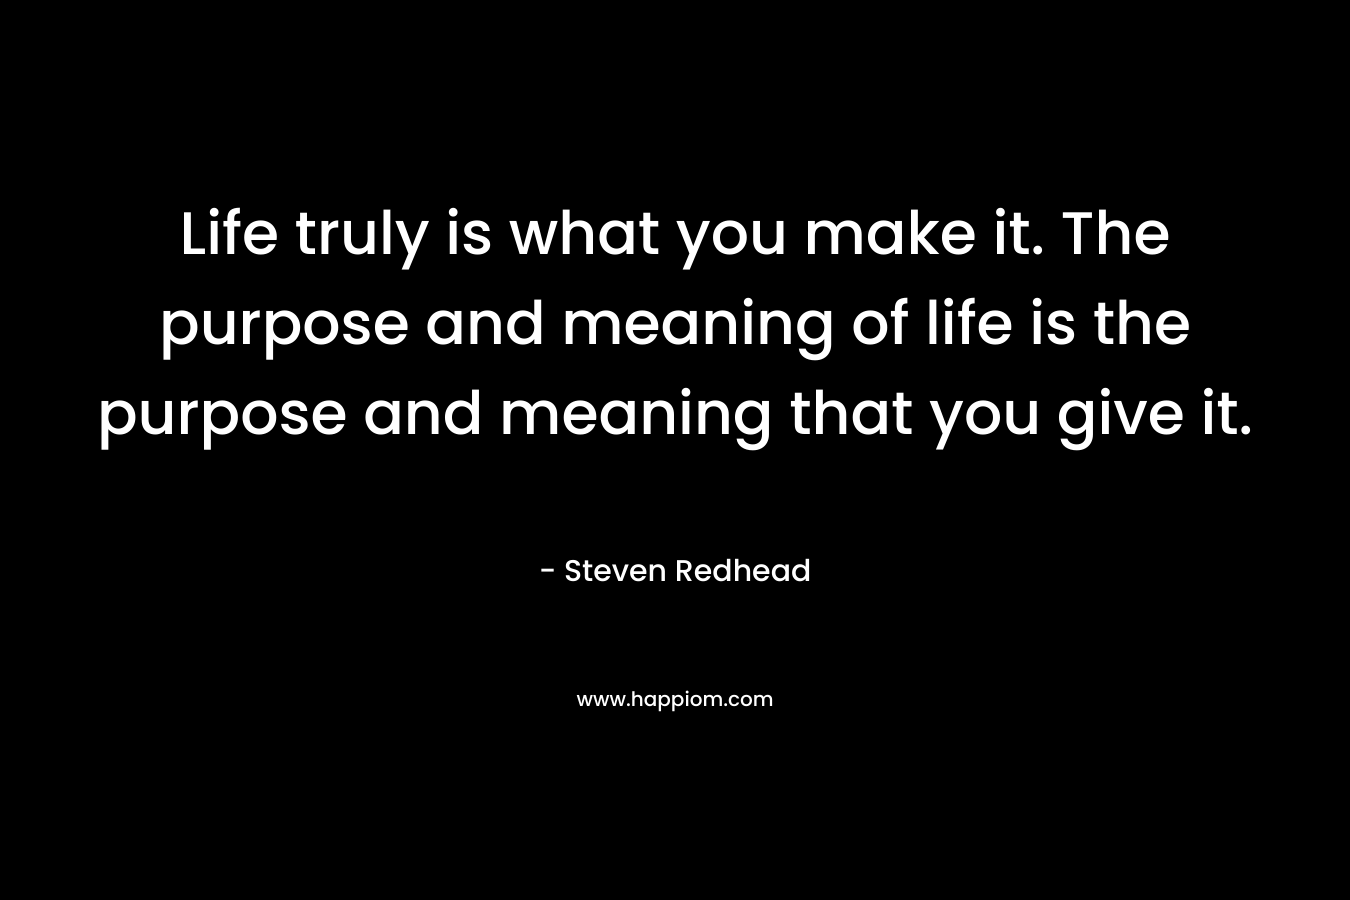 Life truly is what you make it. The purpose and meaning of life is the purpose and meaning that you give it.